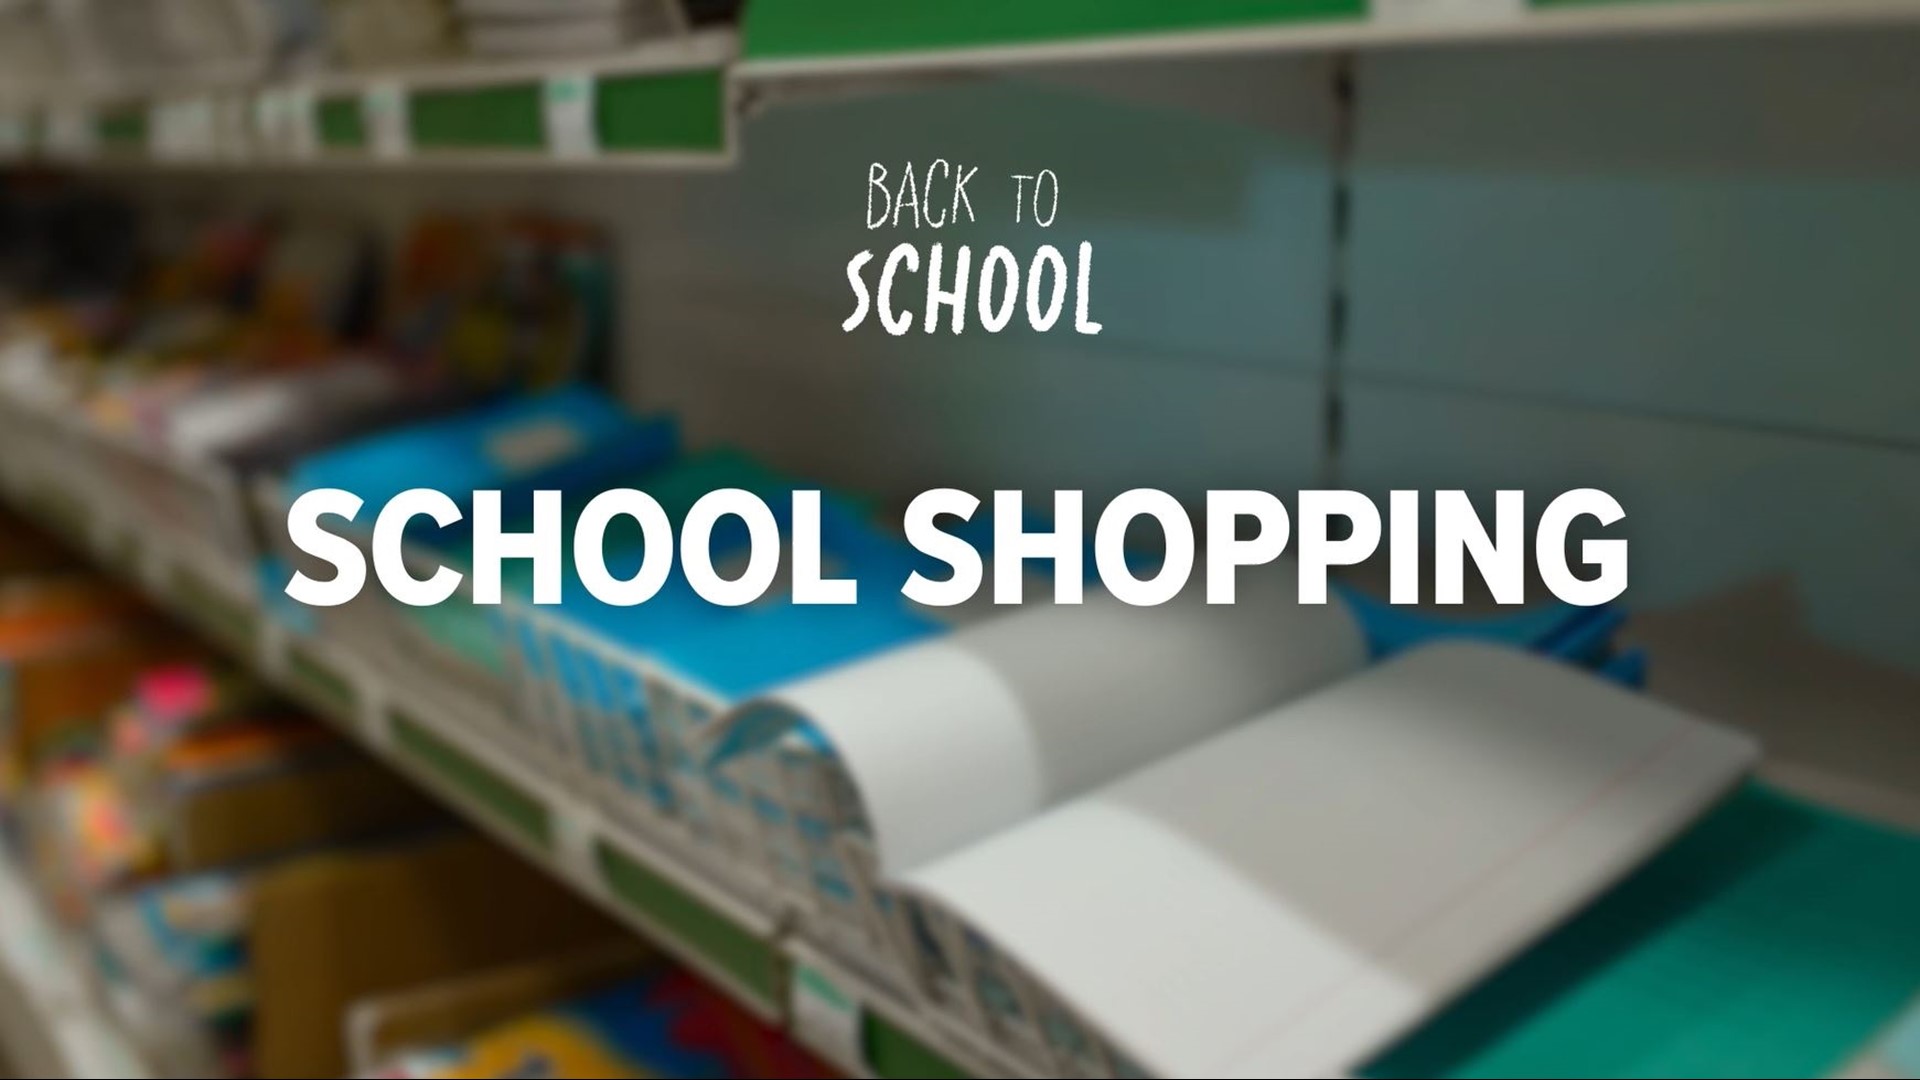 Ways you can save while back-to-school shopping and where you cand find the best deals. Plus, the different community events helping people save.